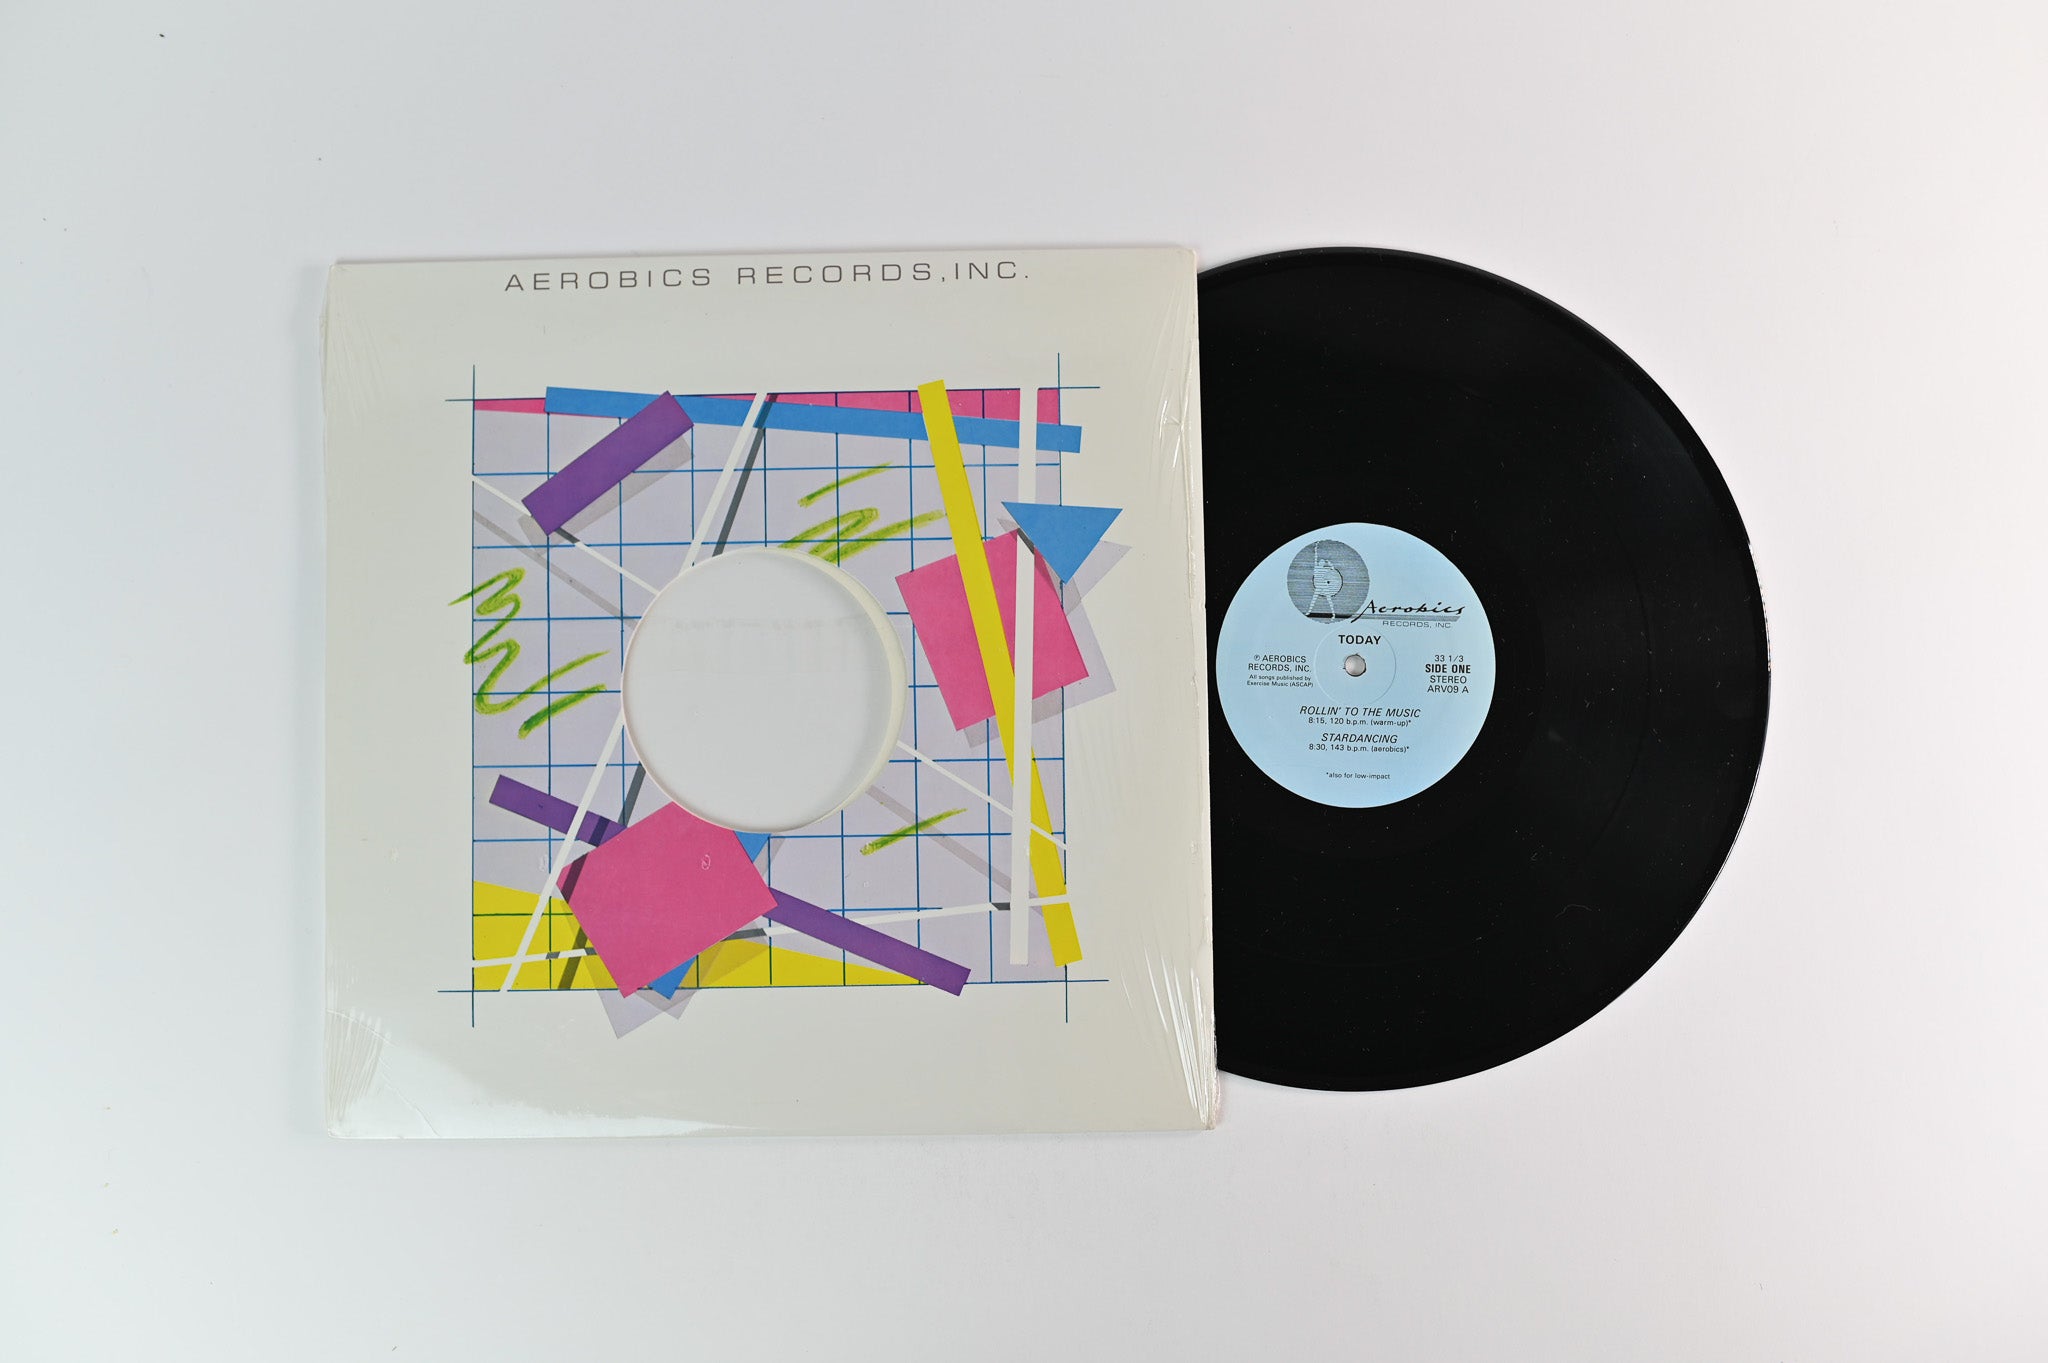 Today - Today on Aerobics Records 12" EP